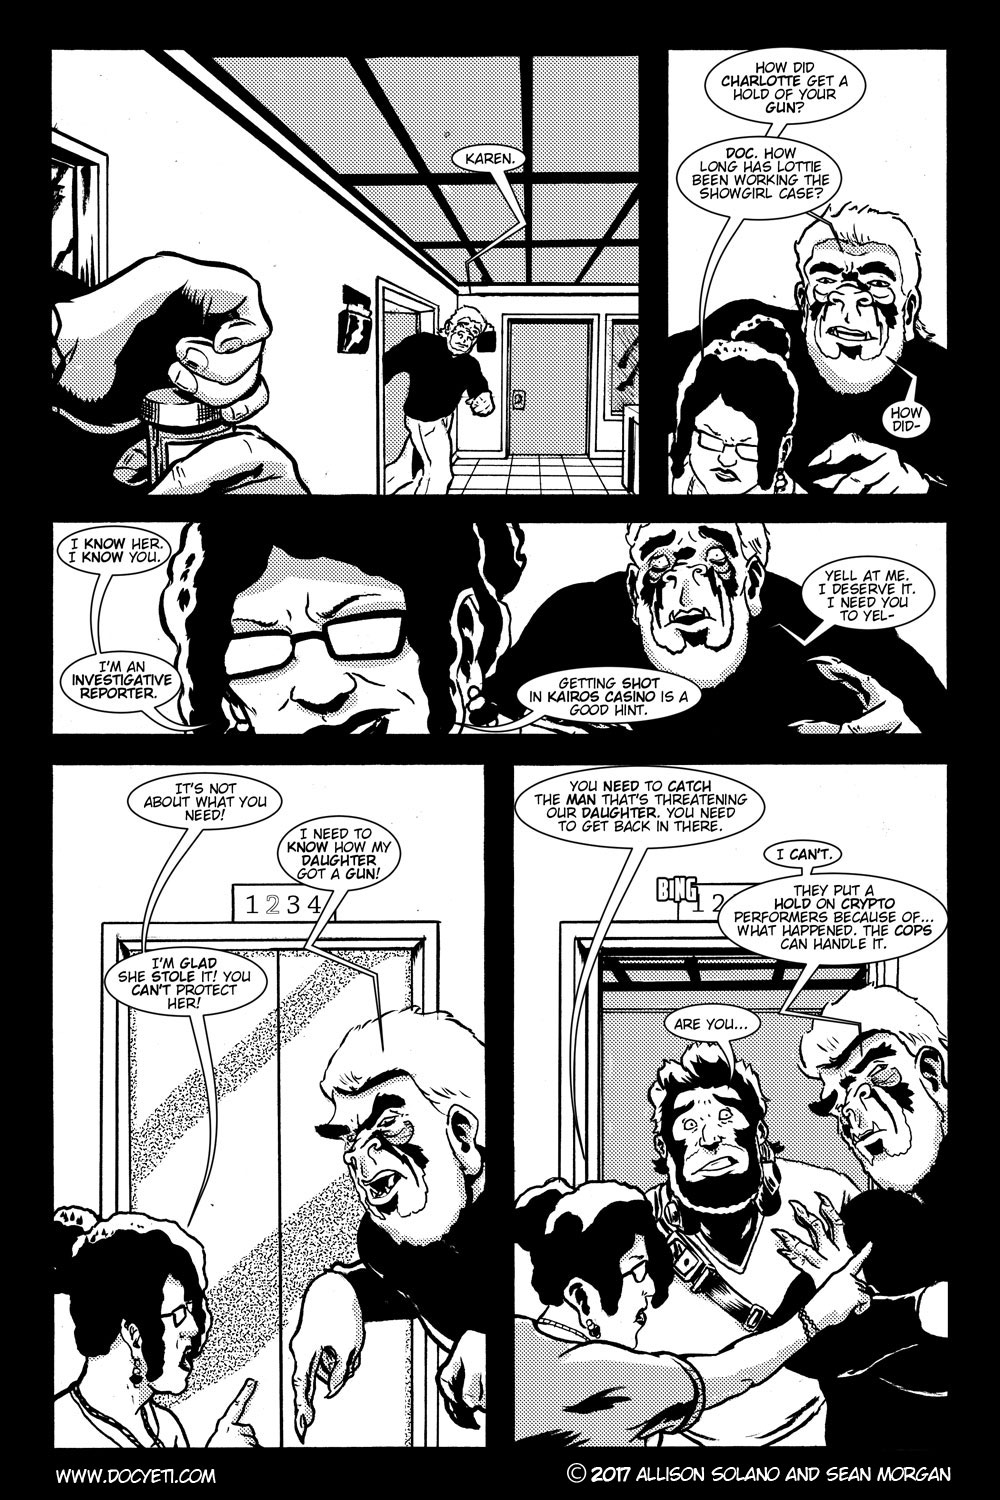 This Yeti for Hire! or the Yeti with the Lace Kerchief! Issue 3 pg.04